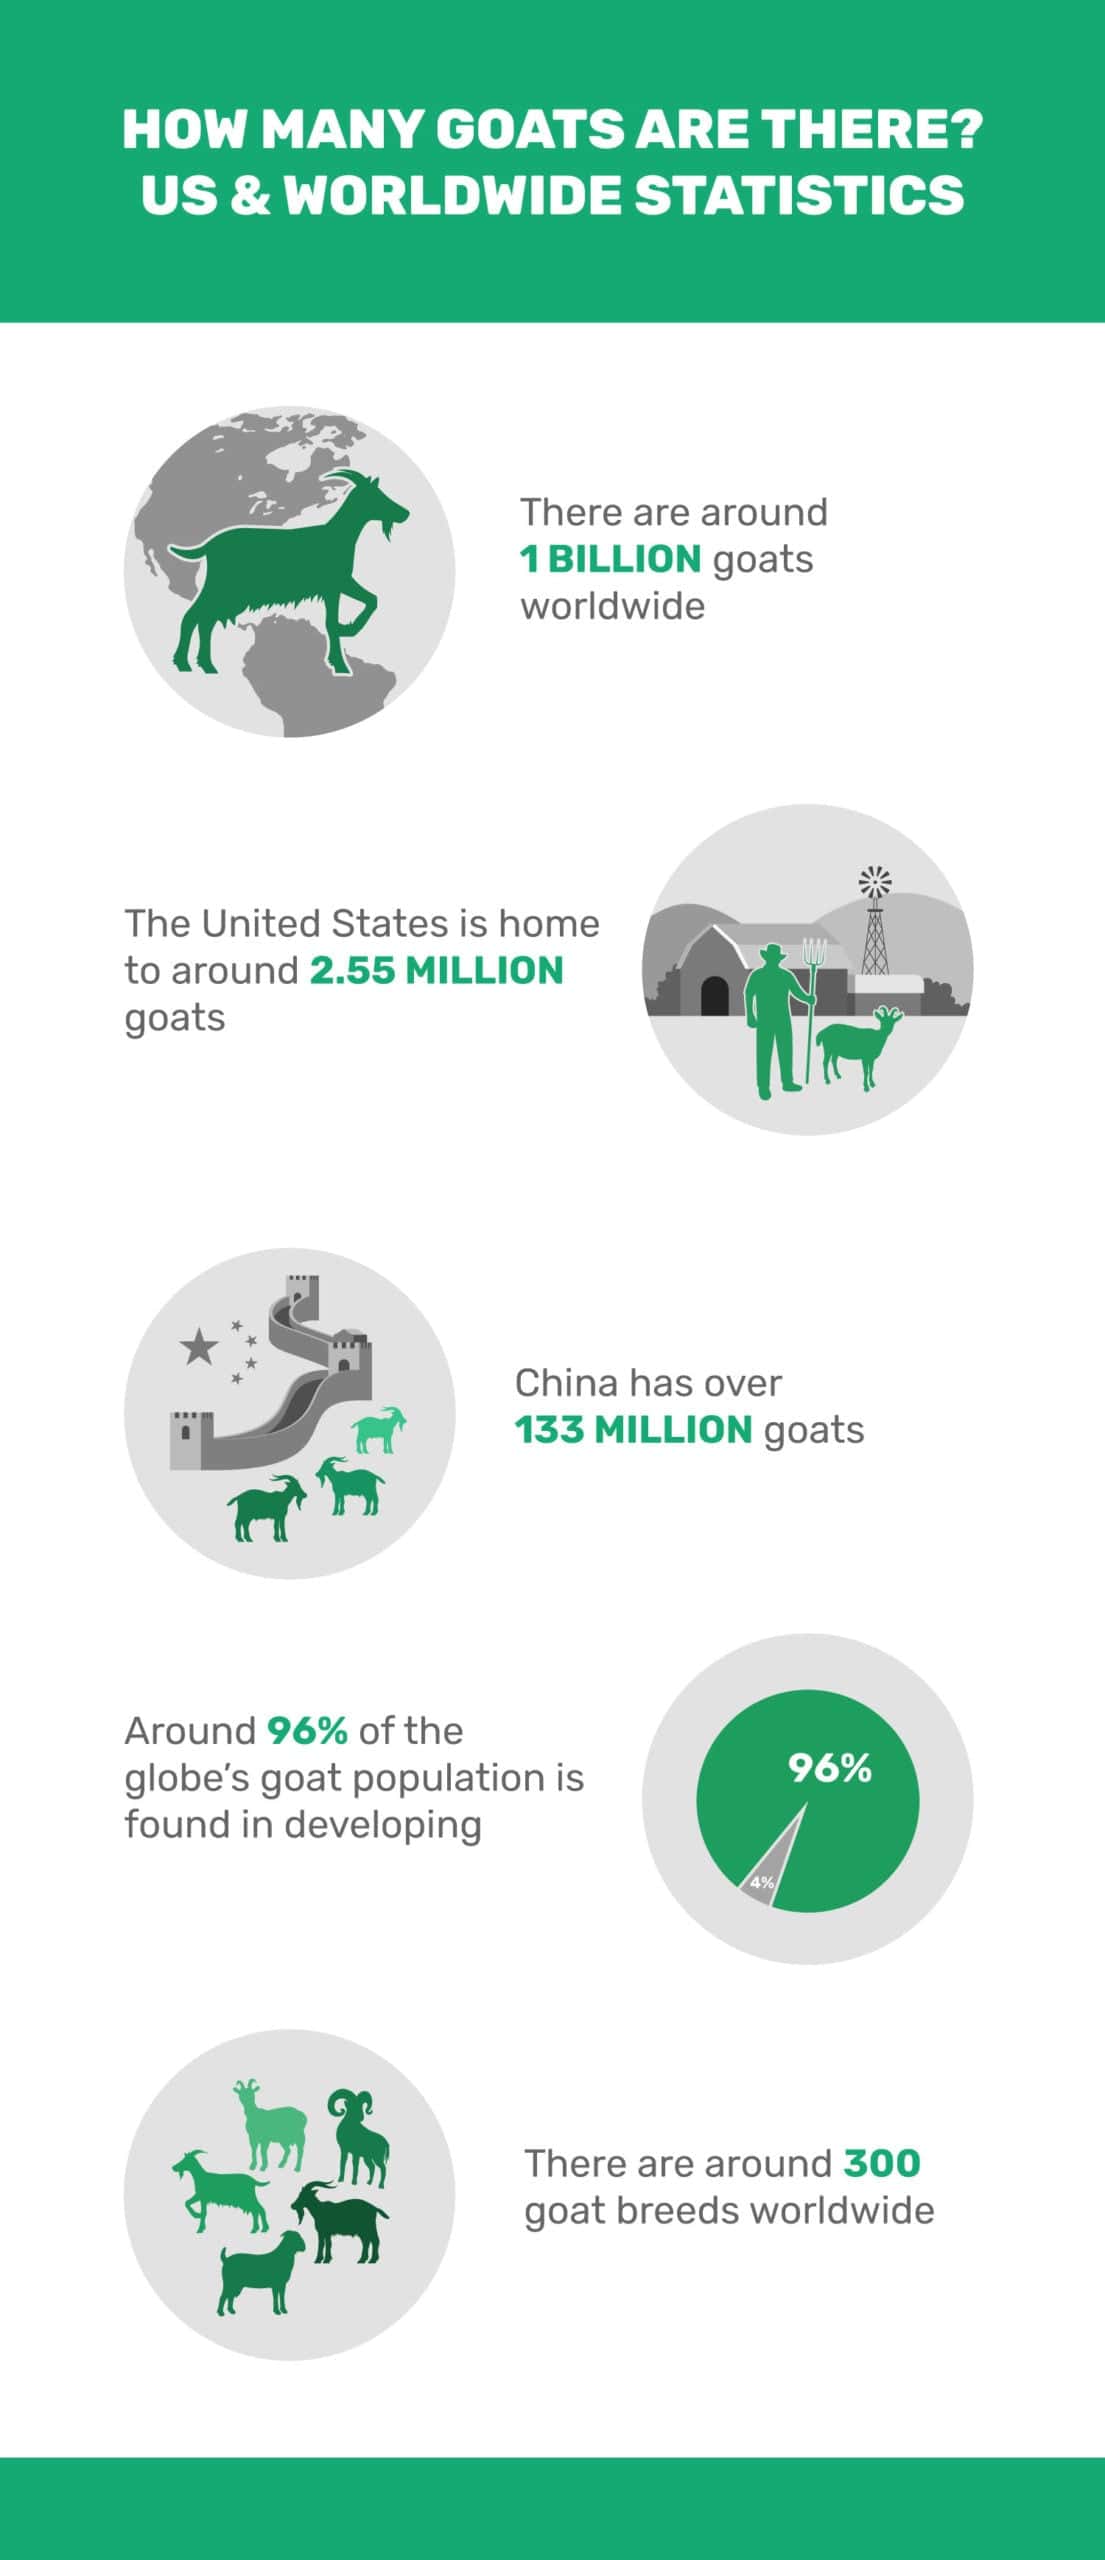 HOW-MANY-GOATS-ARE-THERE-US-&-WORLDWIDE-STATISTICS